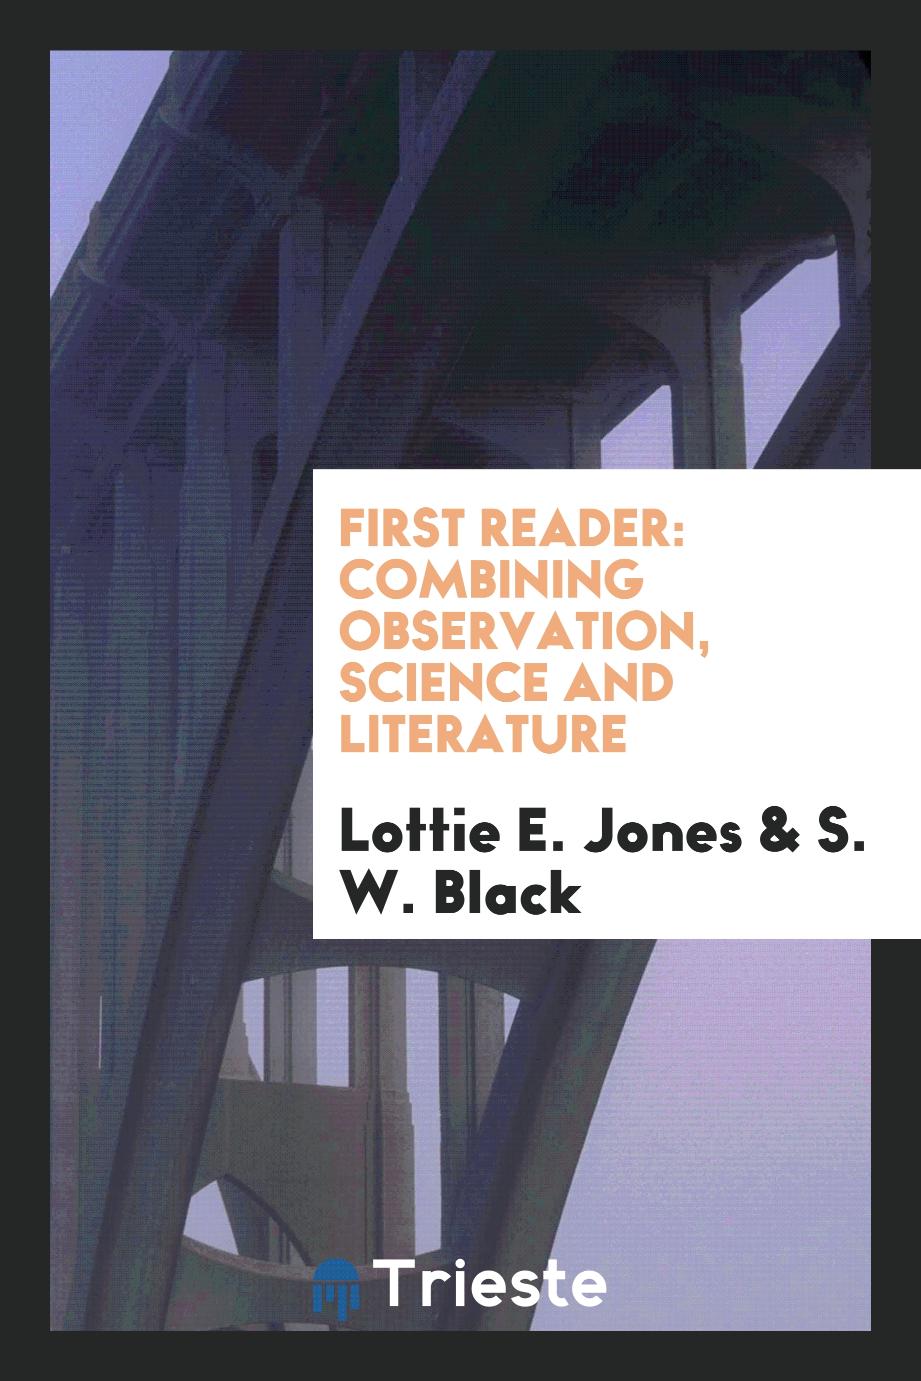 First Reader: Combining Observation, Science and Literature